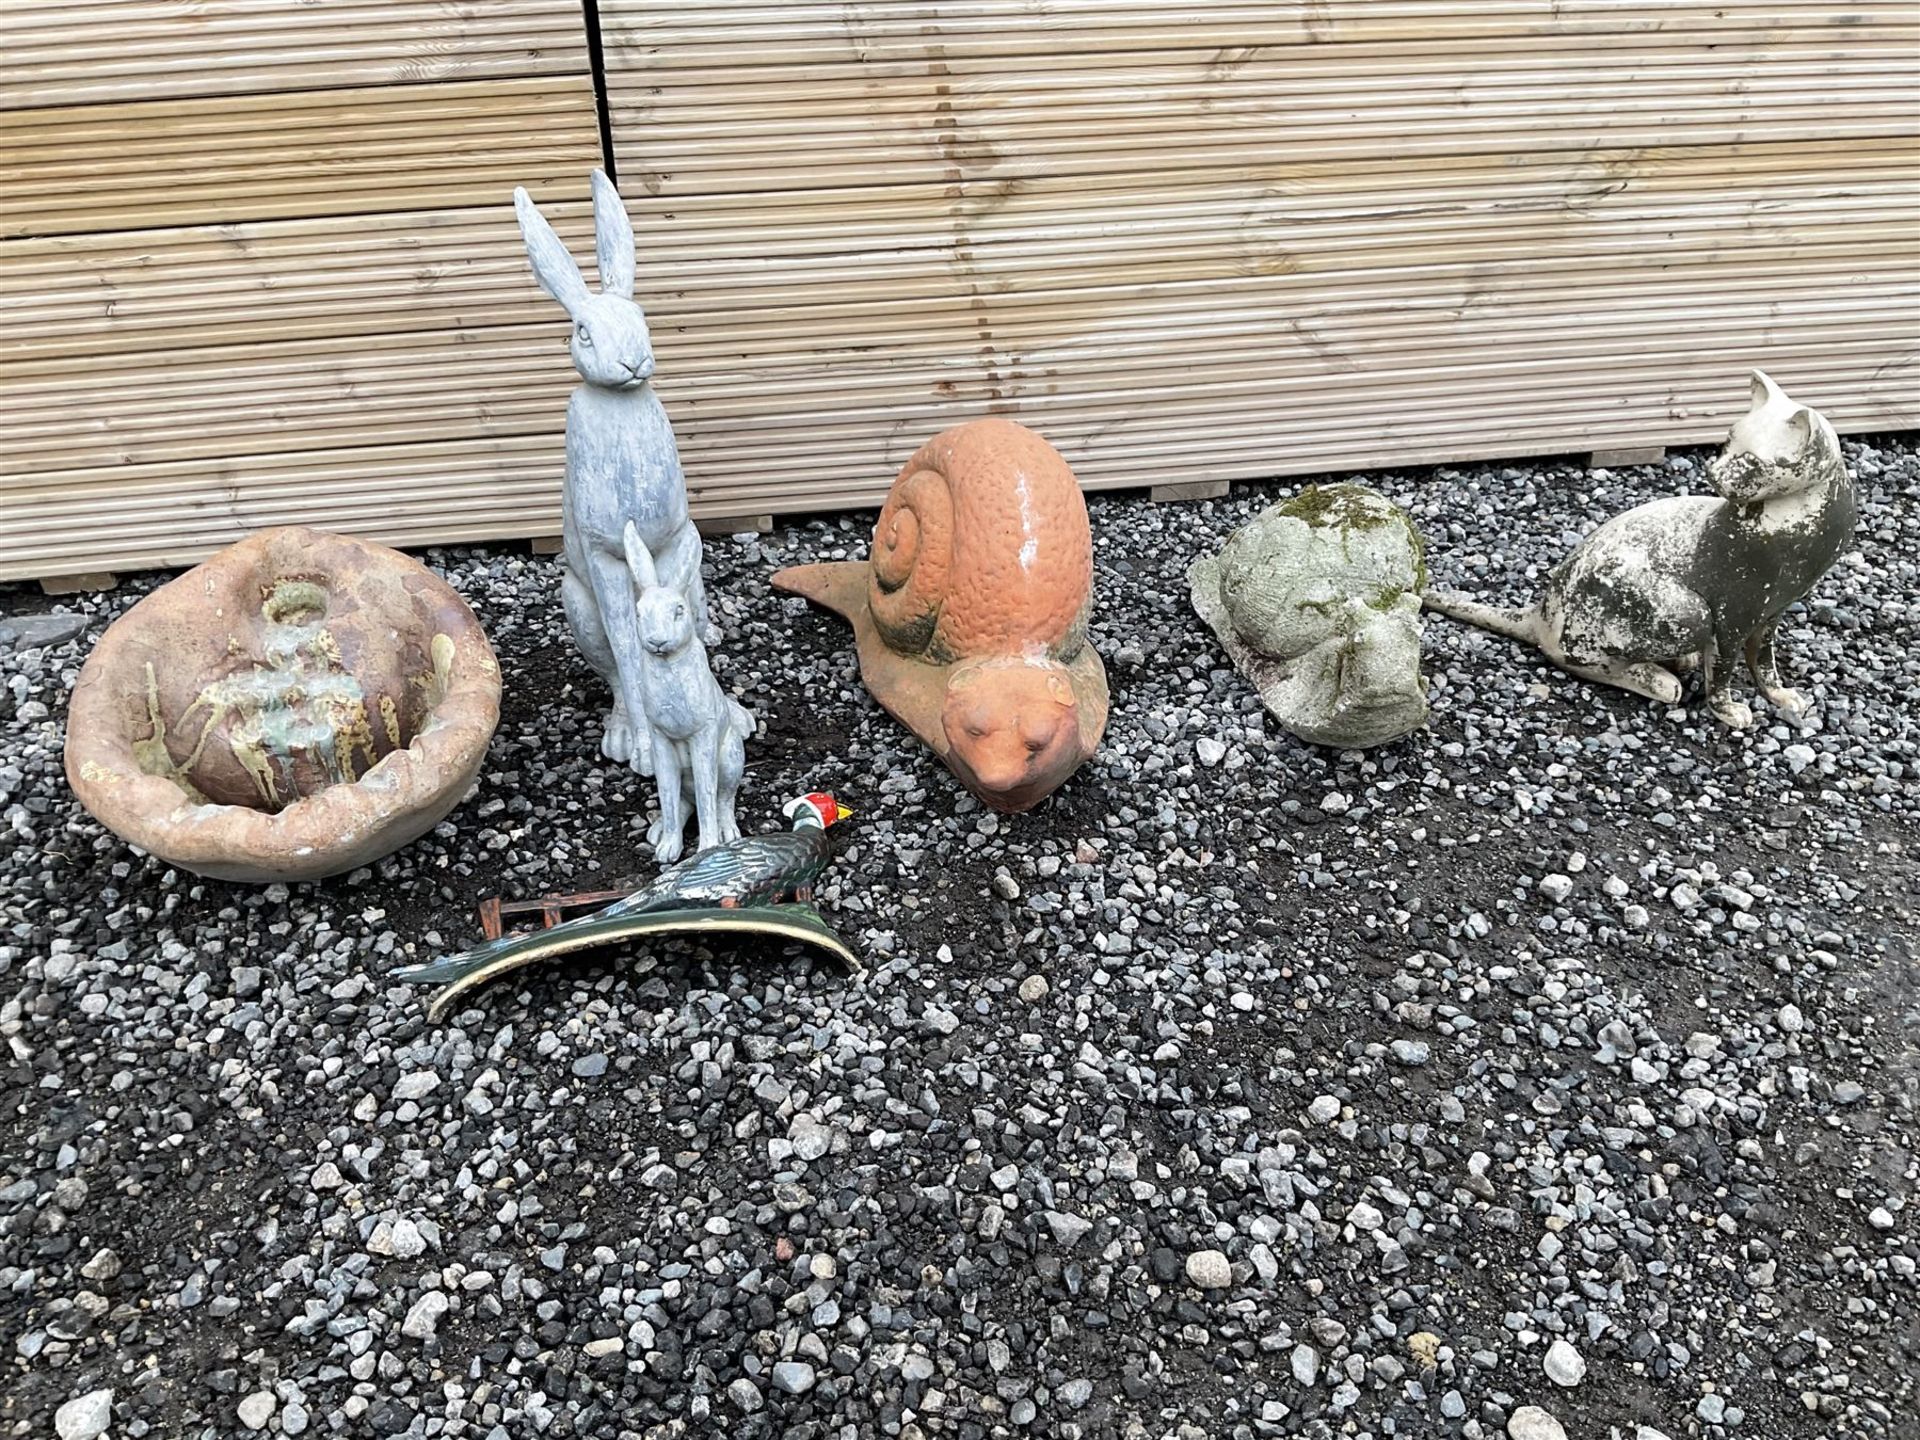 Selection of garden animals such as snails